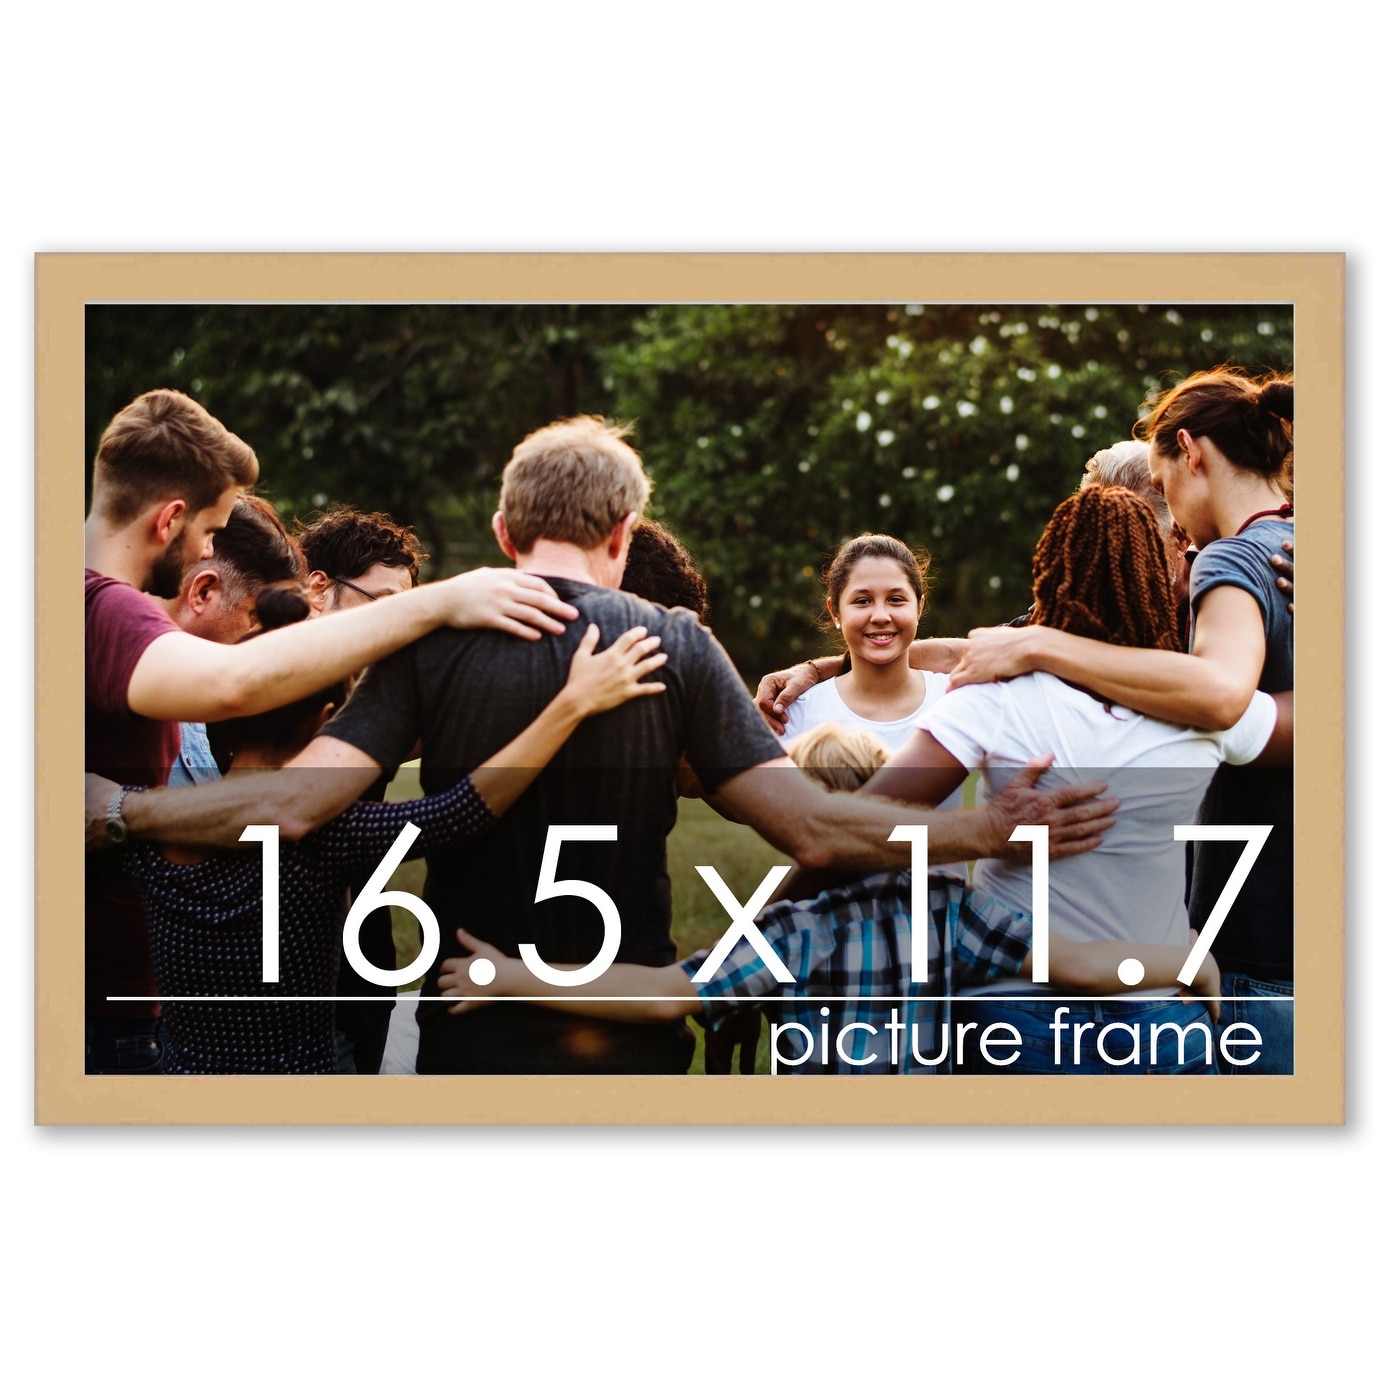 16.5x11.7 Traditional Natural Complete Wood Picture Frame with UV Acrylic, Foam Board Backing, & Hardware - Brown